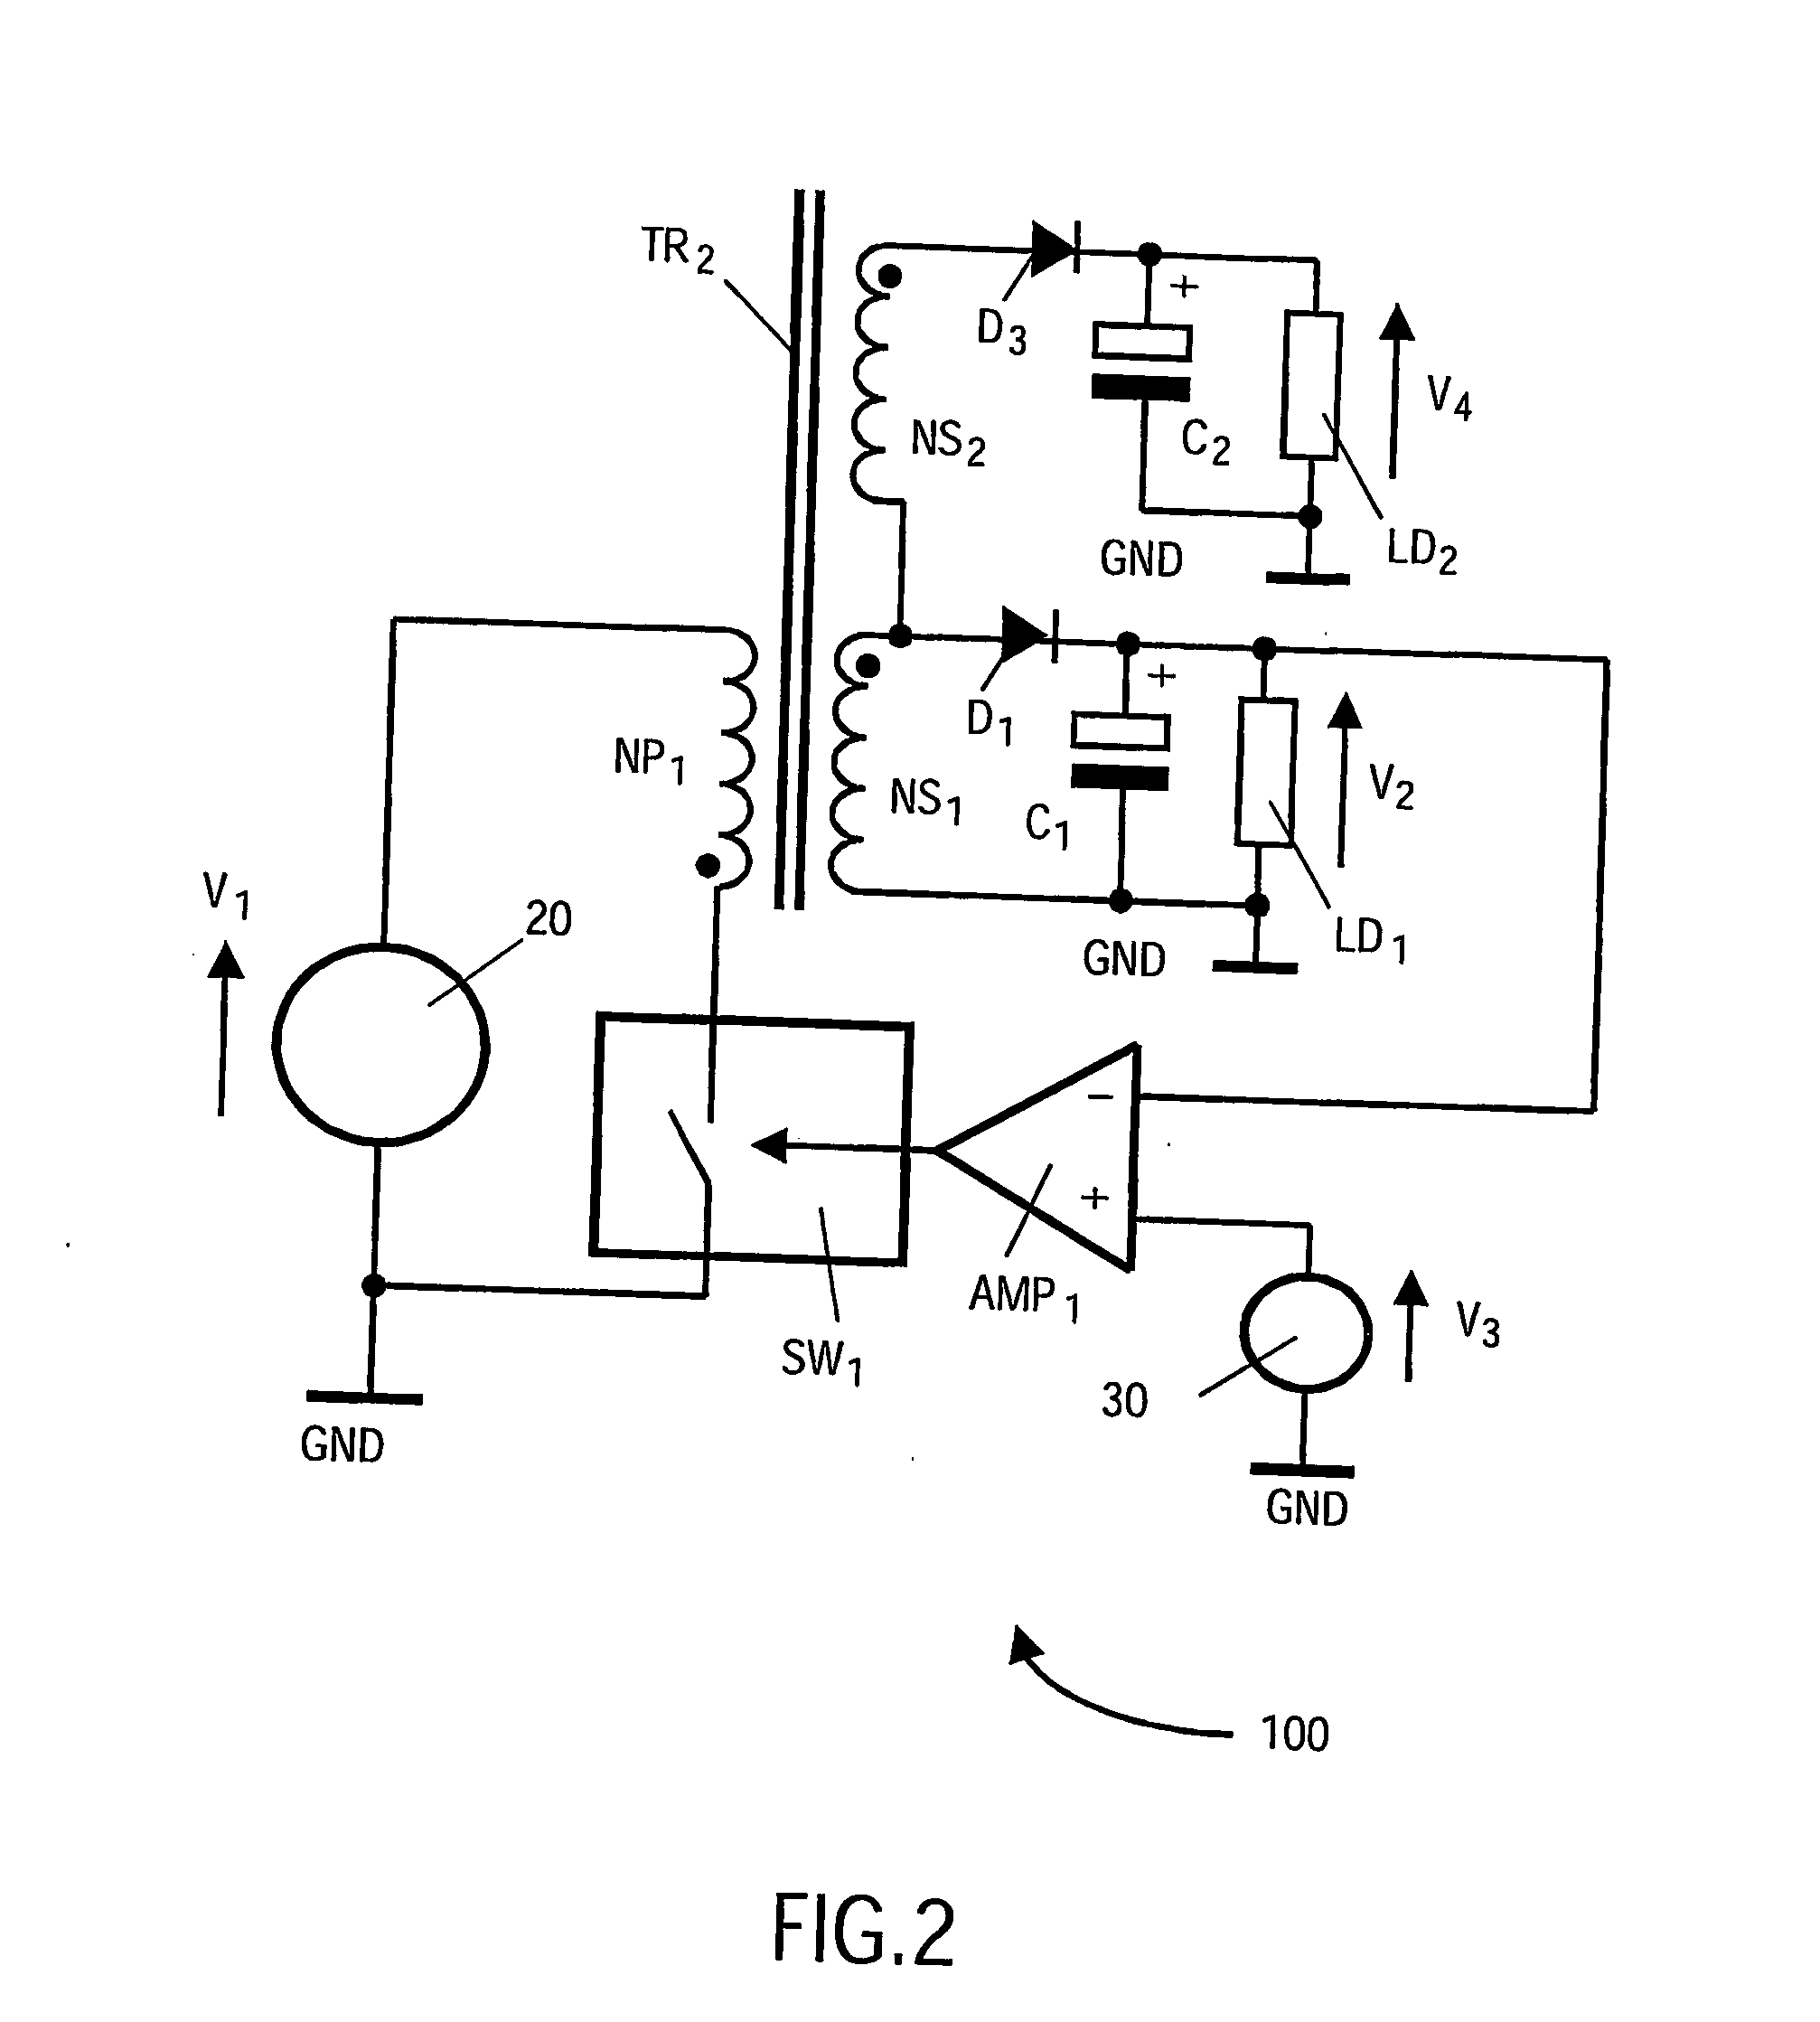 Switch mode power supply apparatus with multiple regulated outputs and a single feedback loop